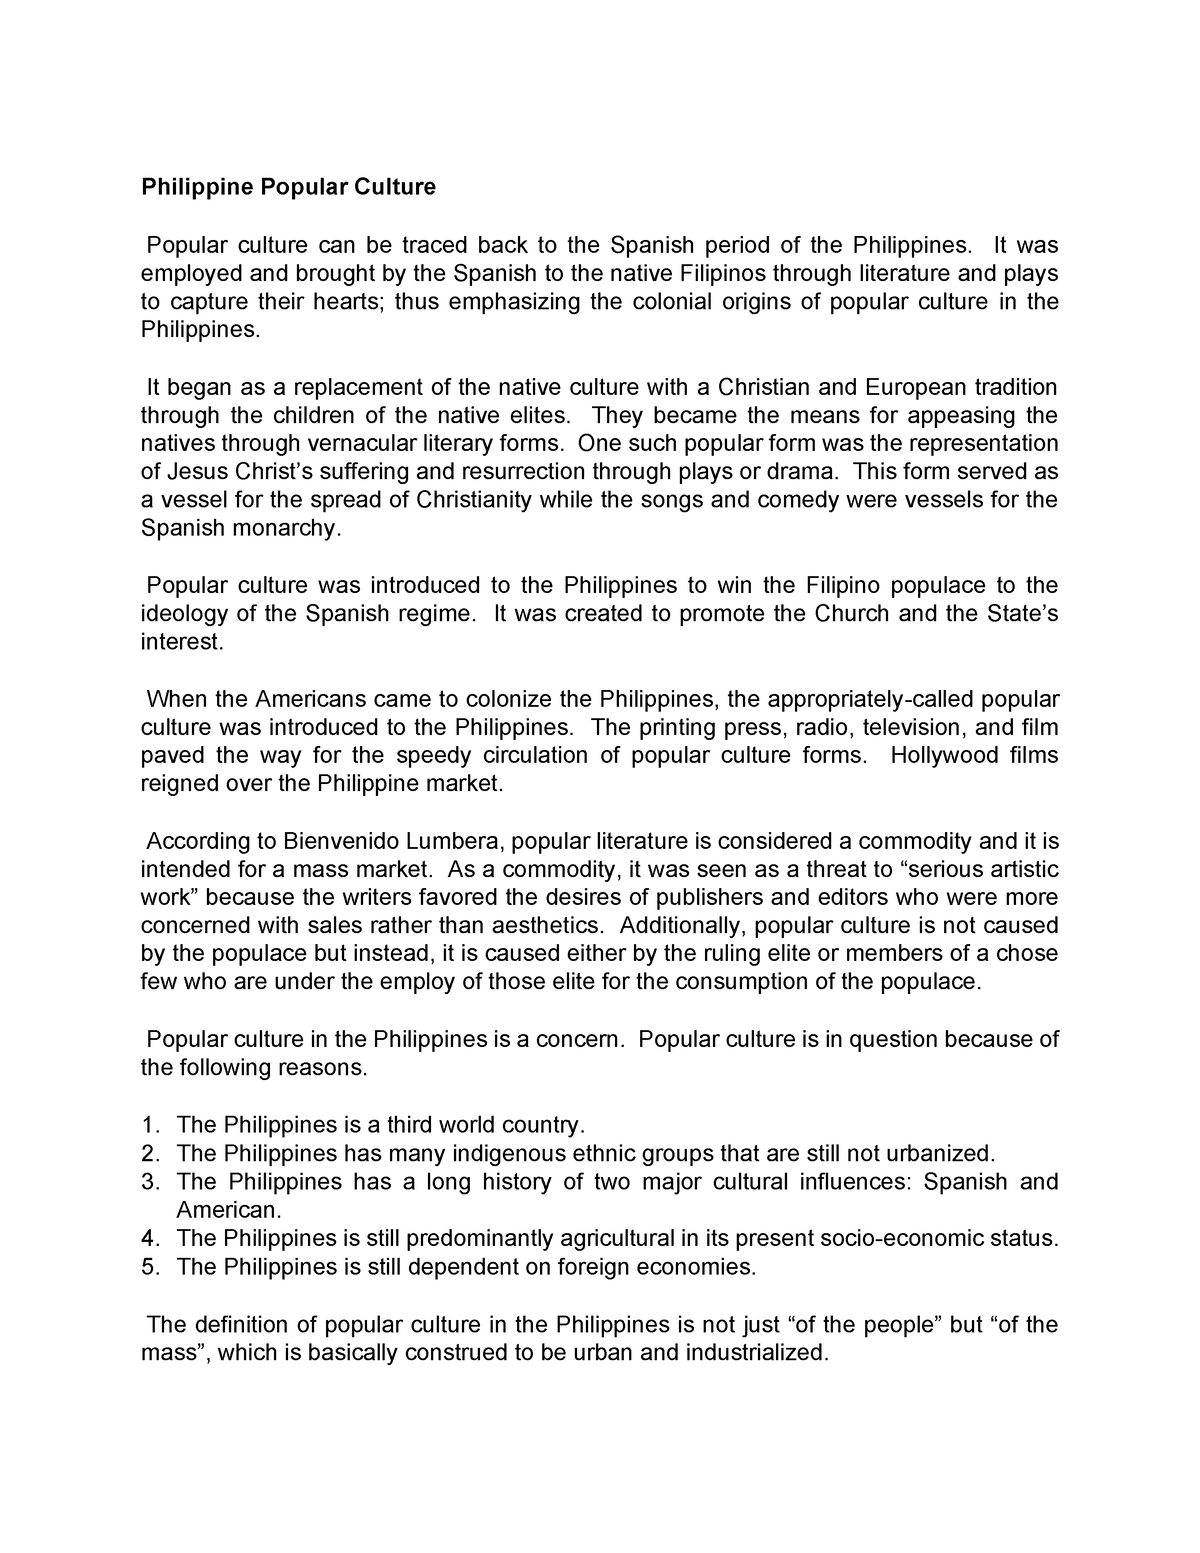 essay about philippine culture